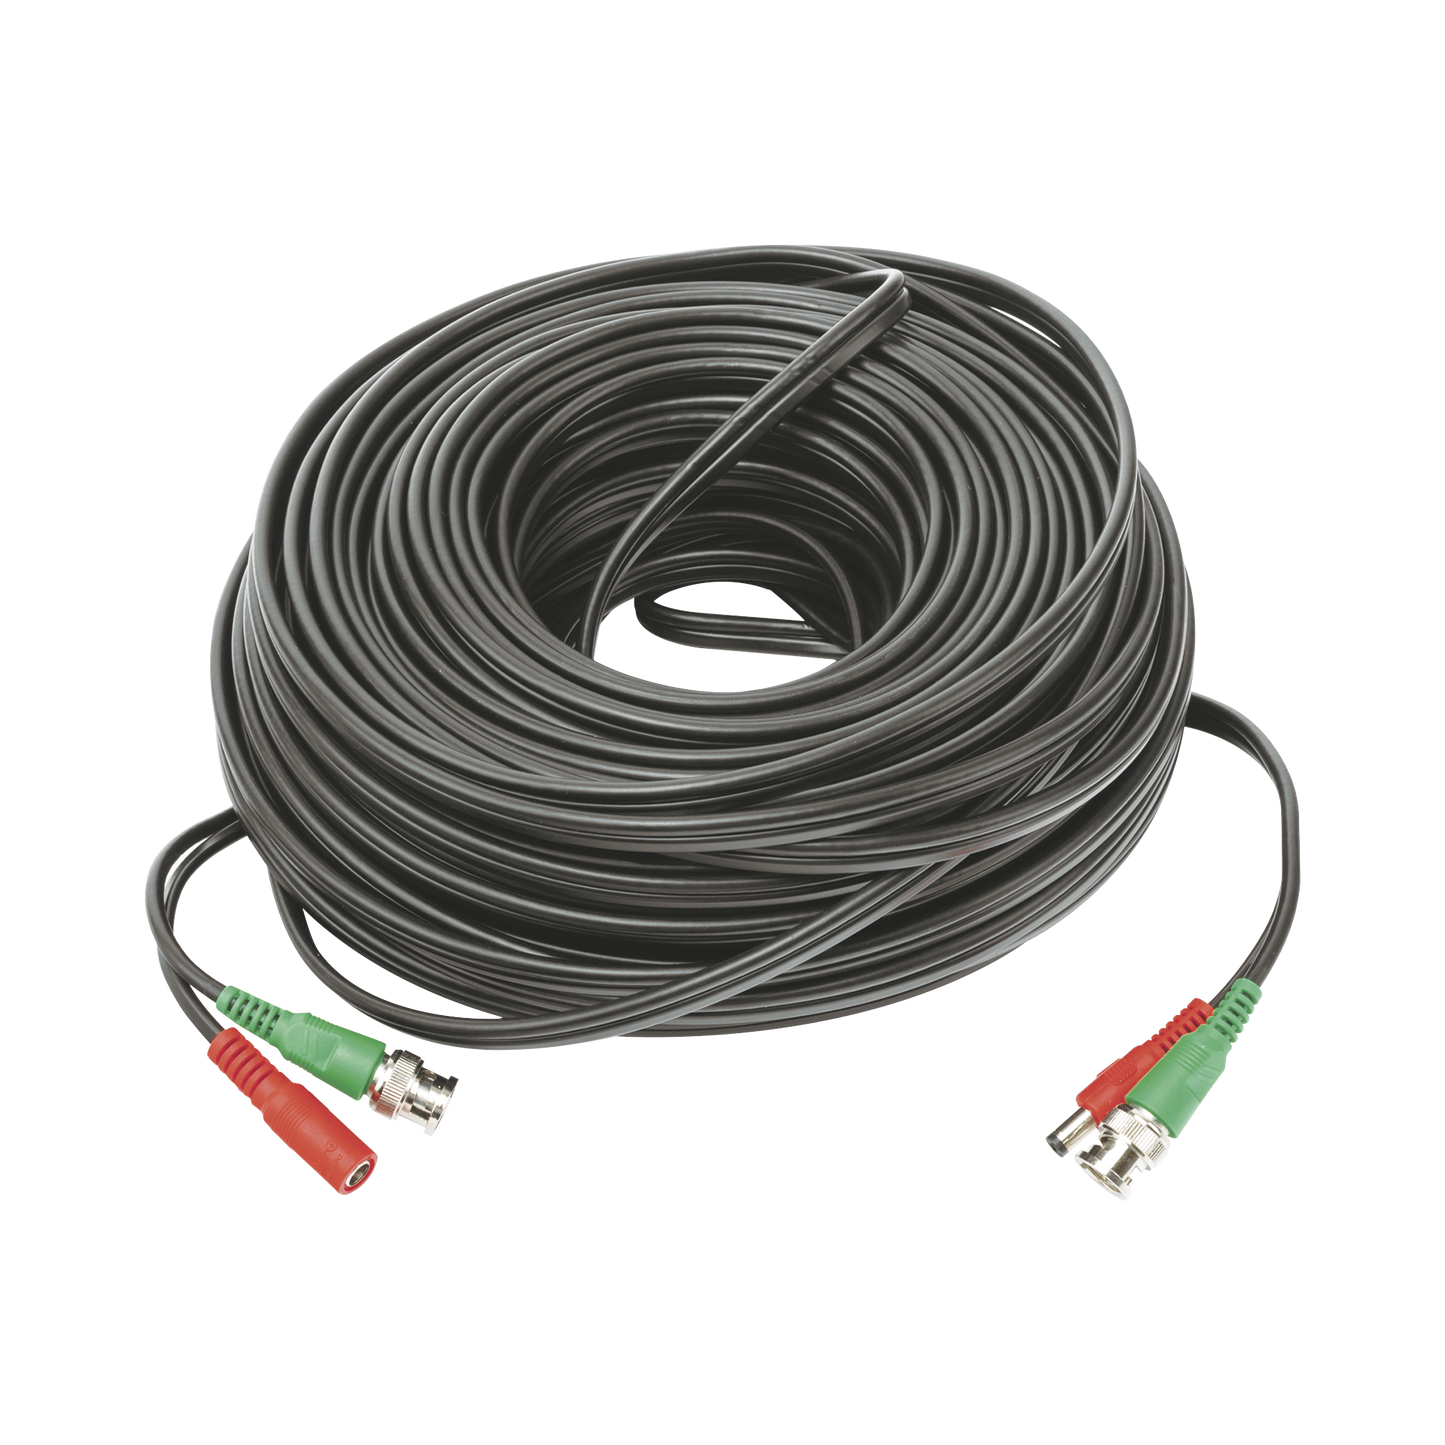 50 meters / Coaxial cable ( BNC ) + Power / 100% Copper / For 4K Cameras / Indoor use